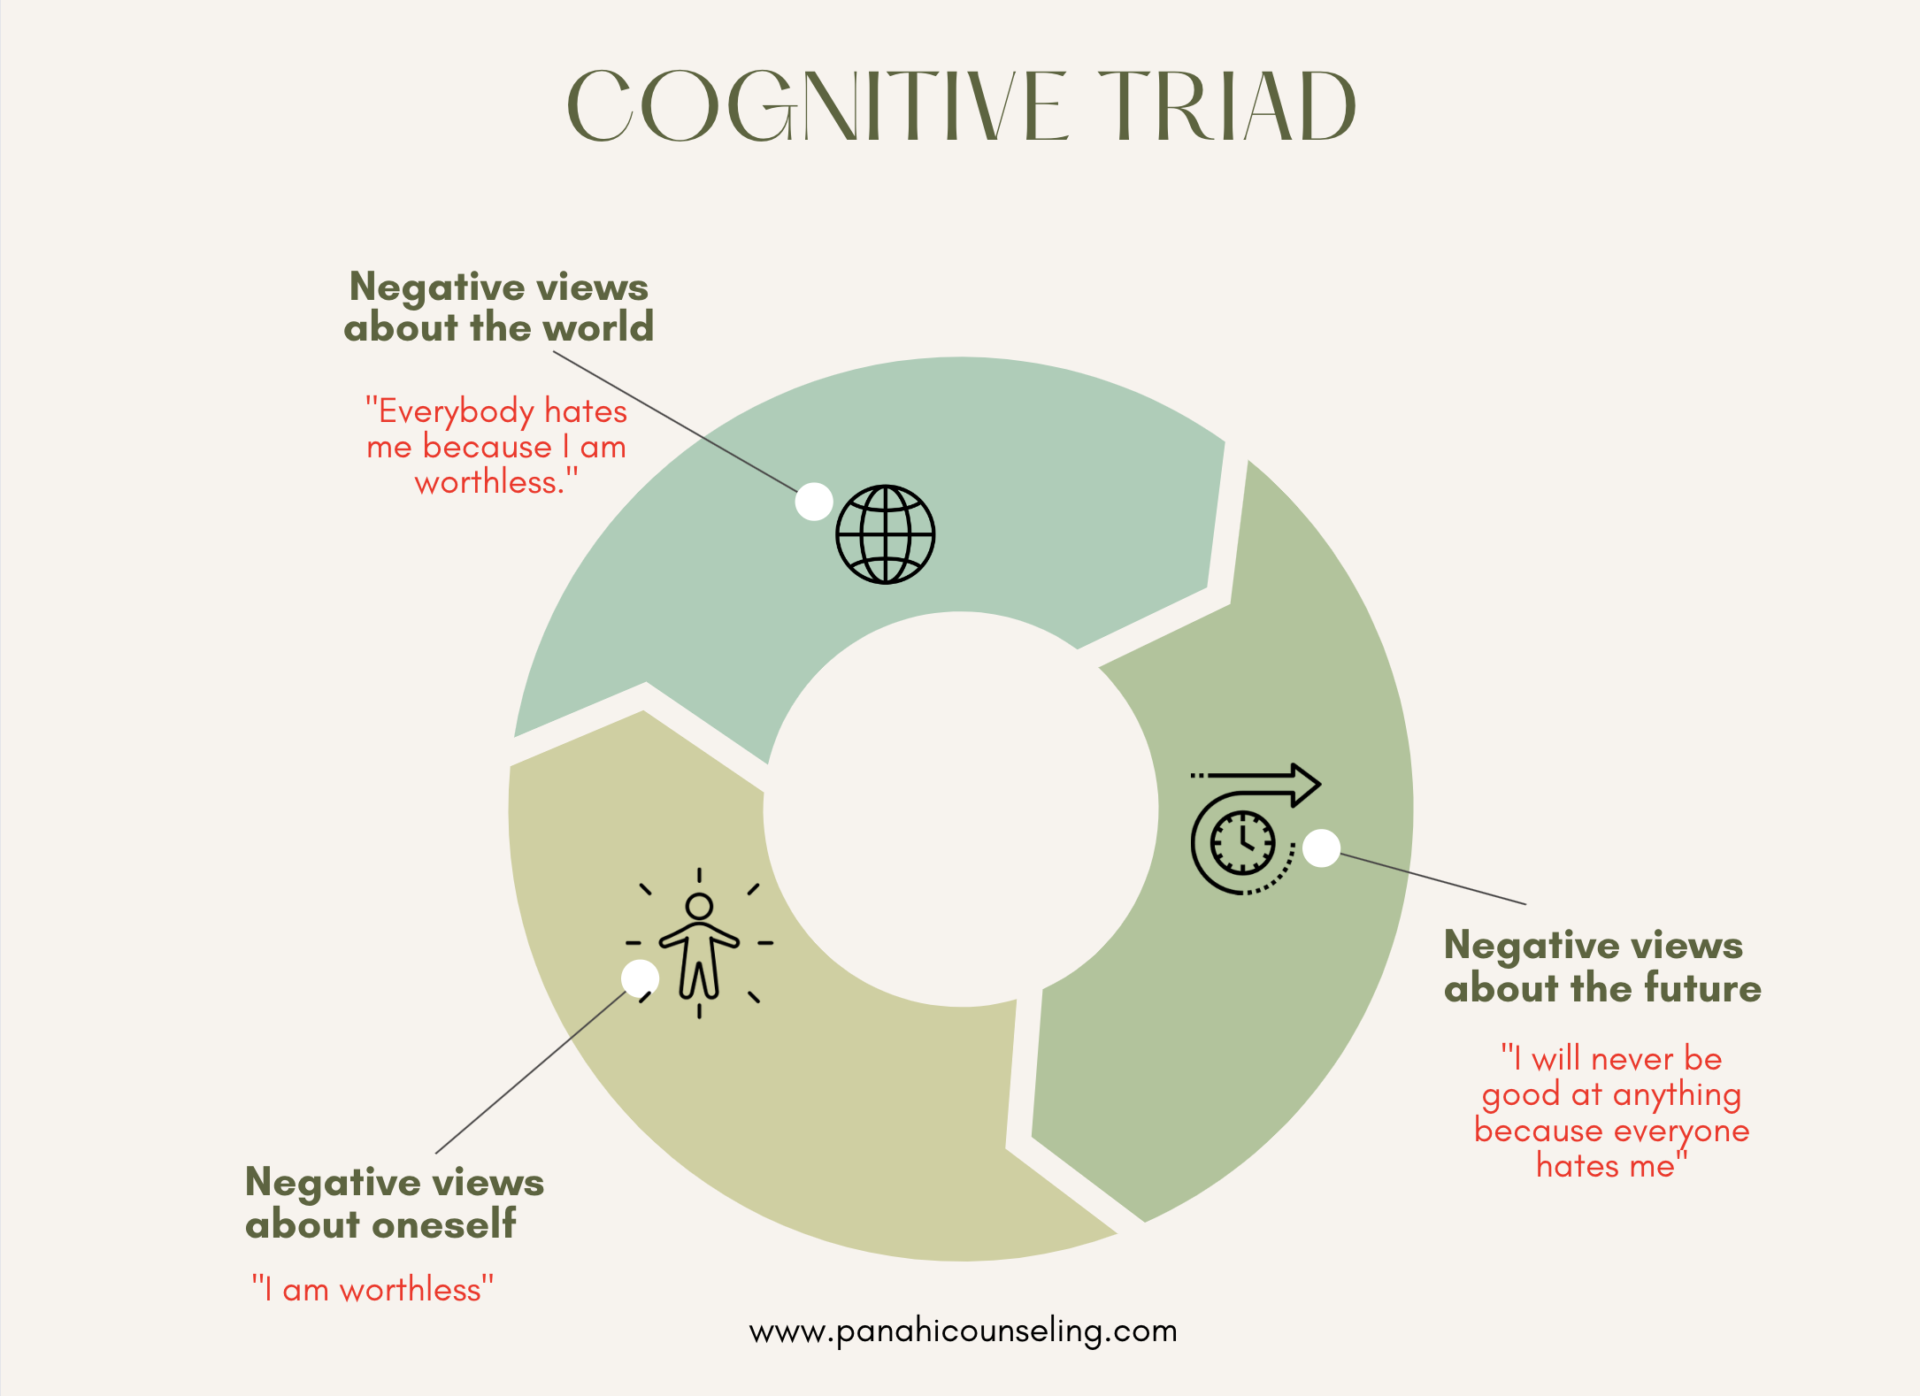 the cognitive triad